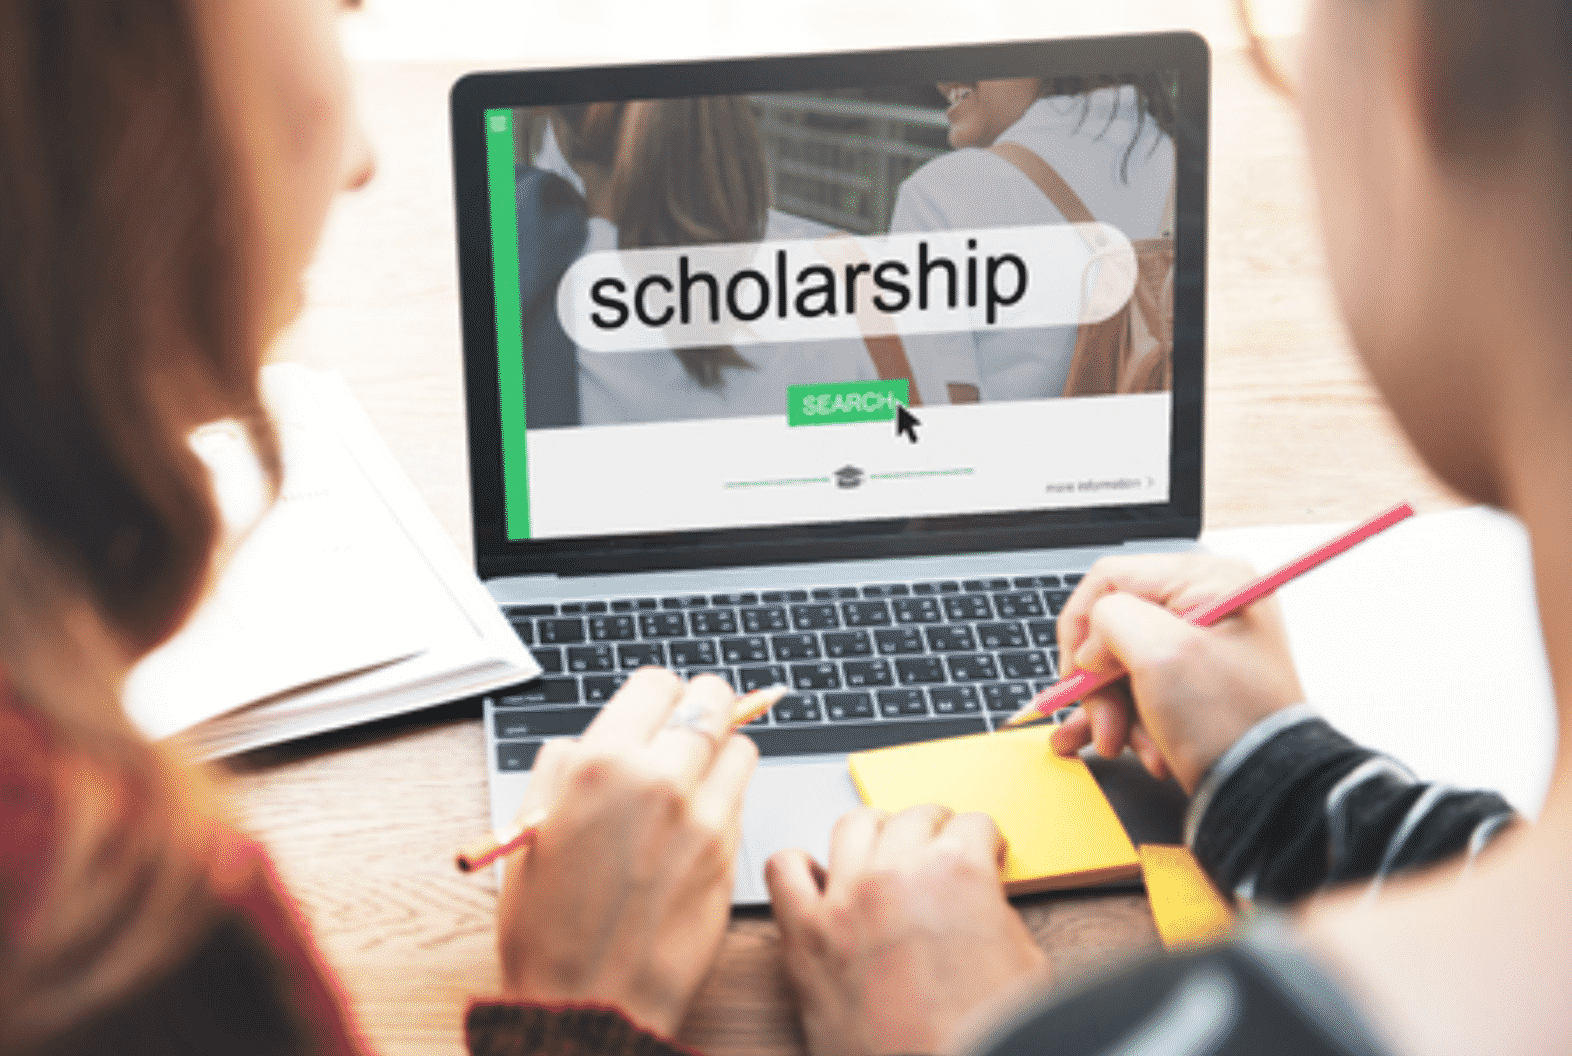 Can You Apply for Too Many Scholarships?